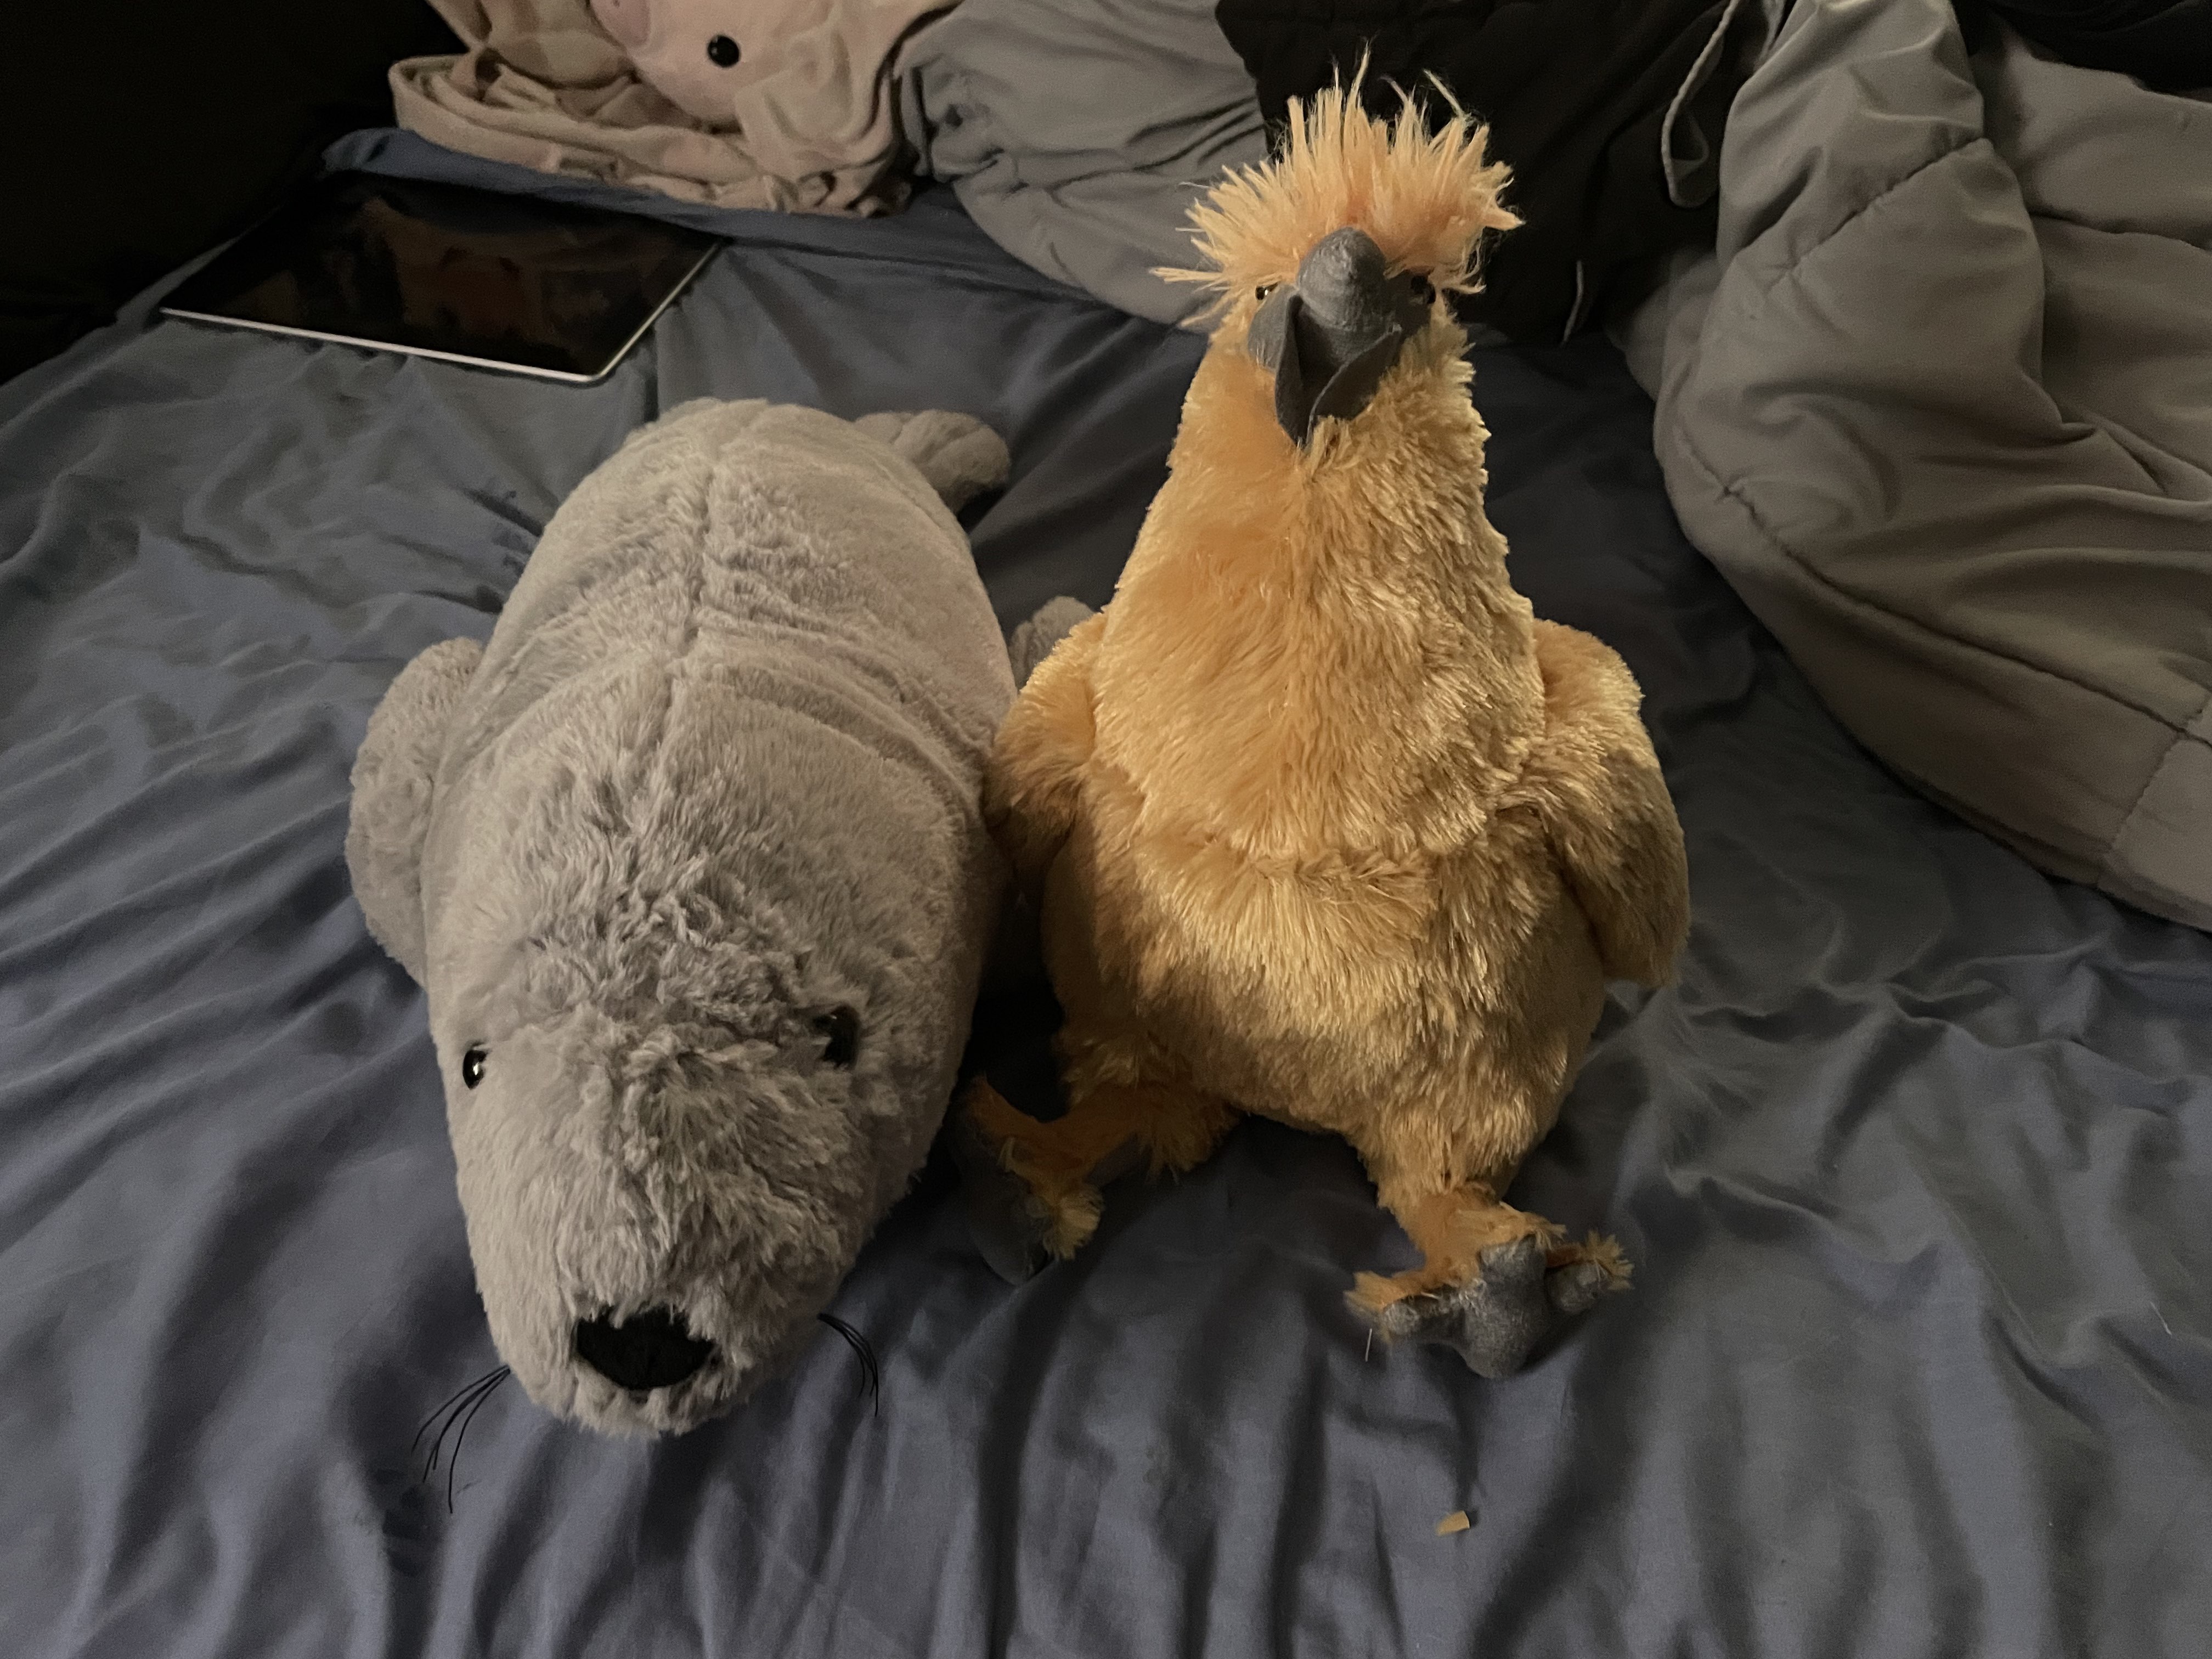 AN IMAGE OF THE TWO PLUSHIES MY MOM GOT FOR ME, A GRAY SEAL THAT'S WEIGHTED AND A BROWN, SILKIE CHICKEN.